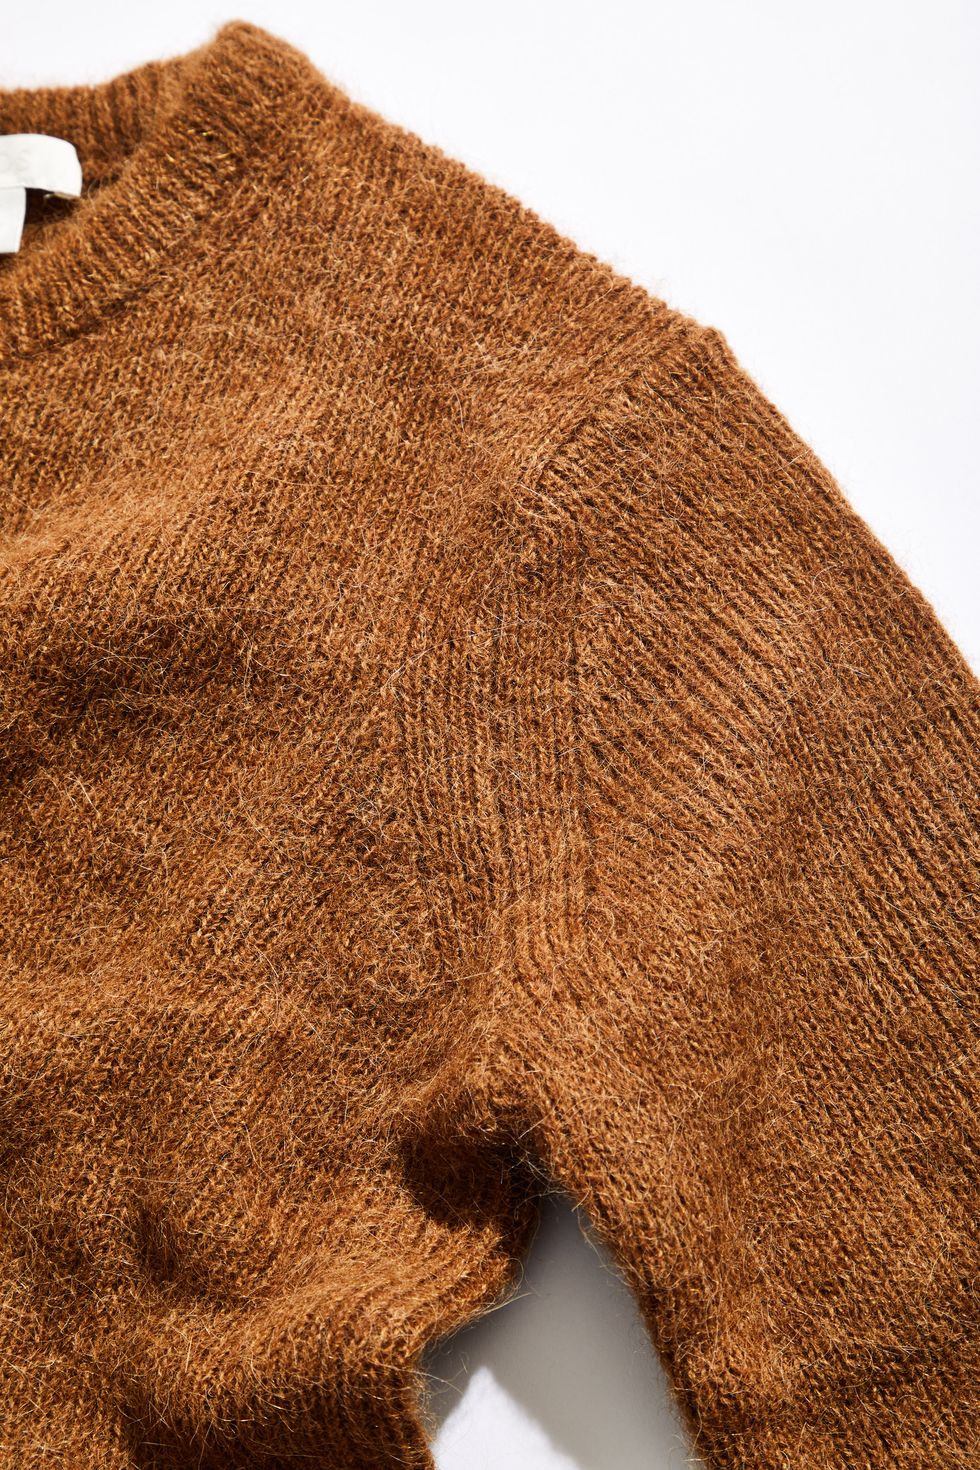 a slanted shoulder seam and a 6040 woolalpaca blend make for a relaxed, cozy pullover﻿